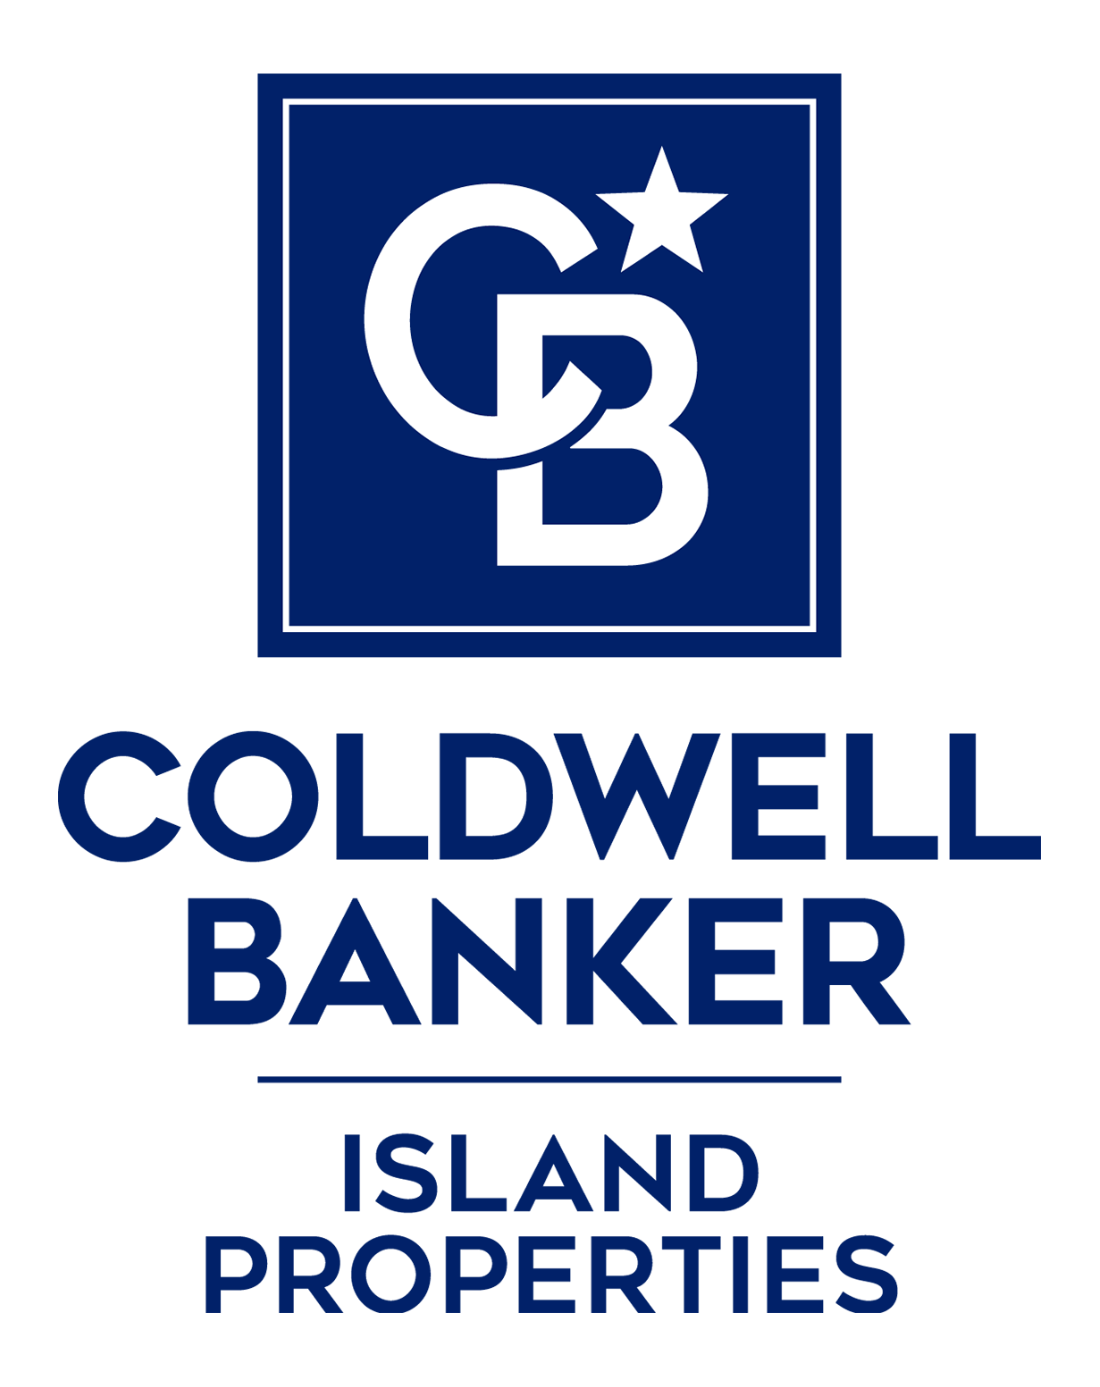 Douglas R. Fitch - Coldwell Banker Island Properties Logo